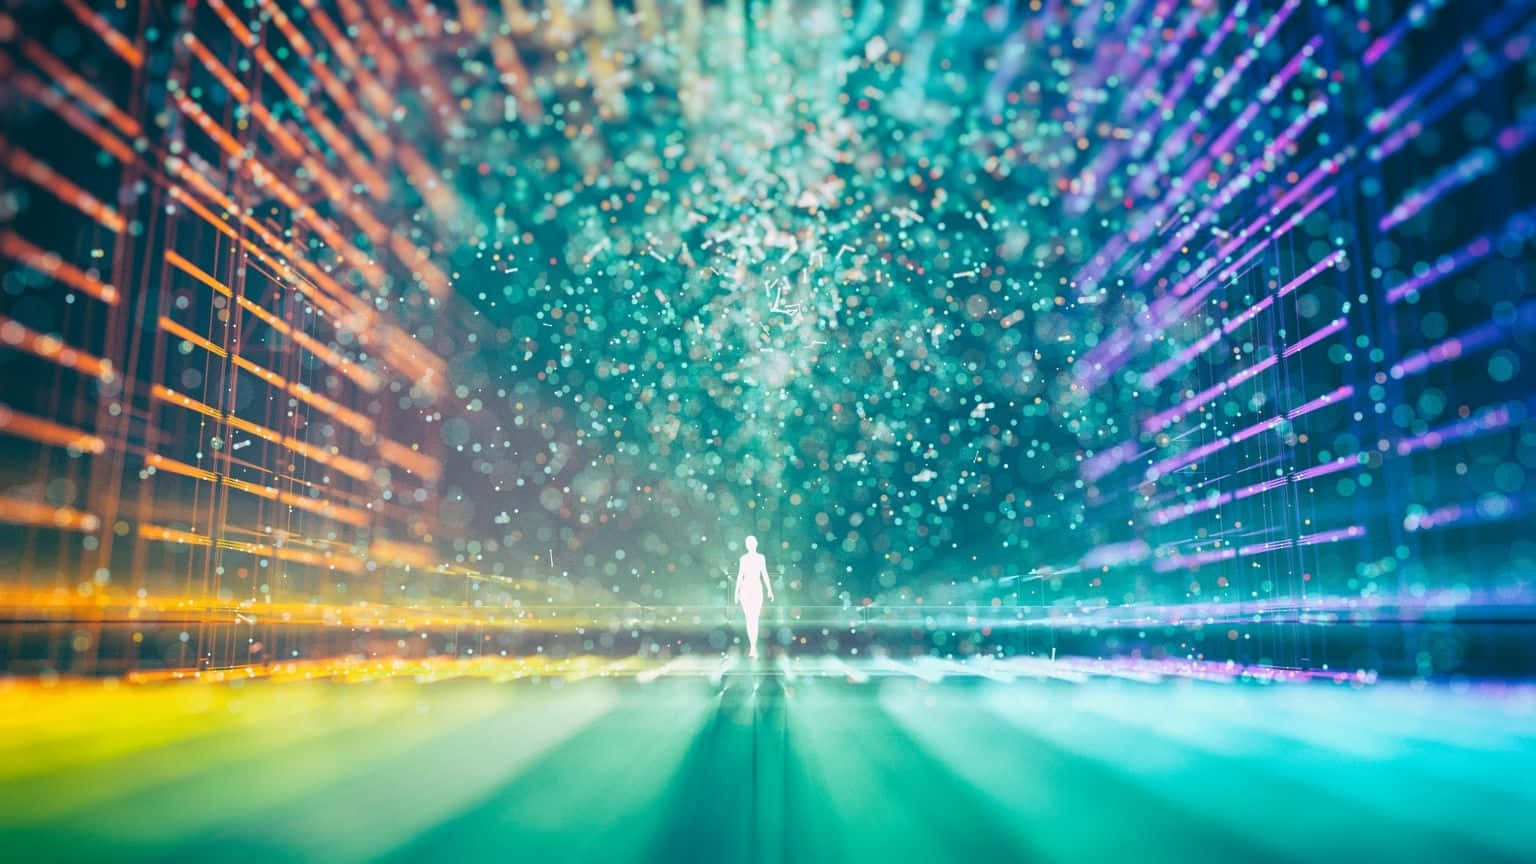 A Person Walking Through A Colorful Tunnel Wallpaper